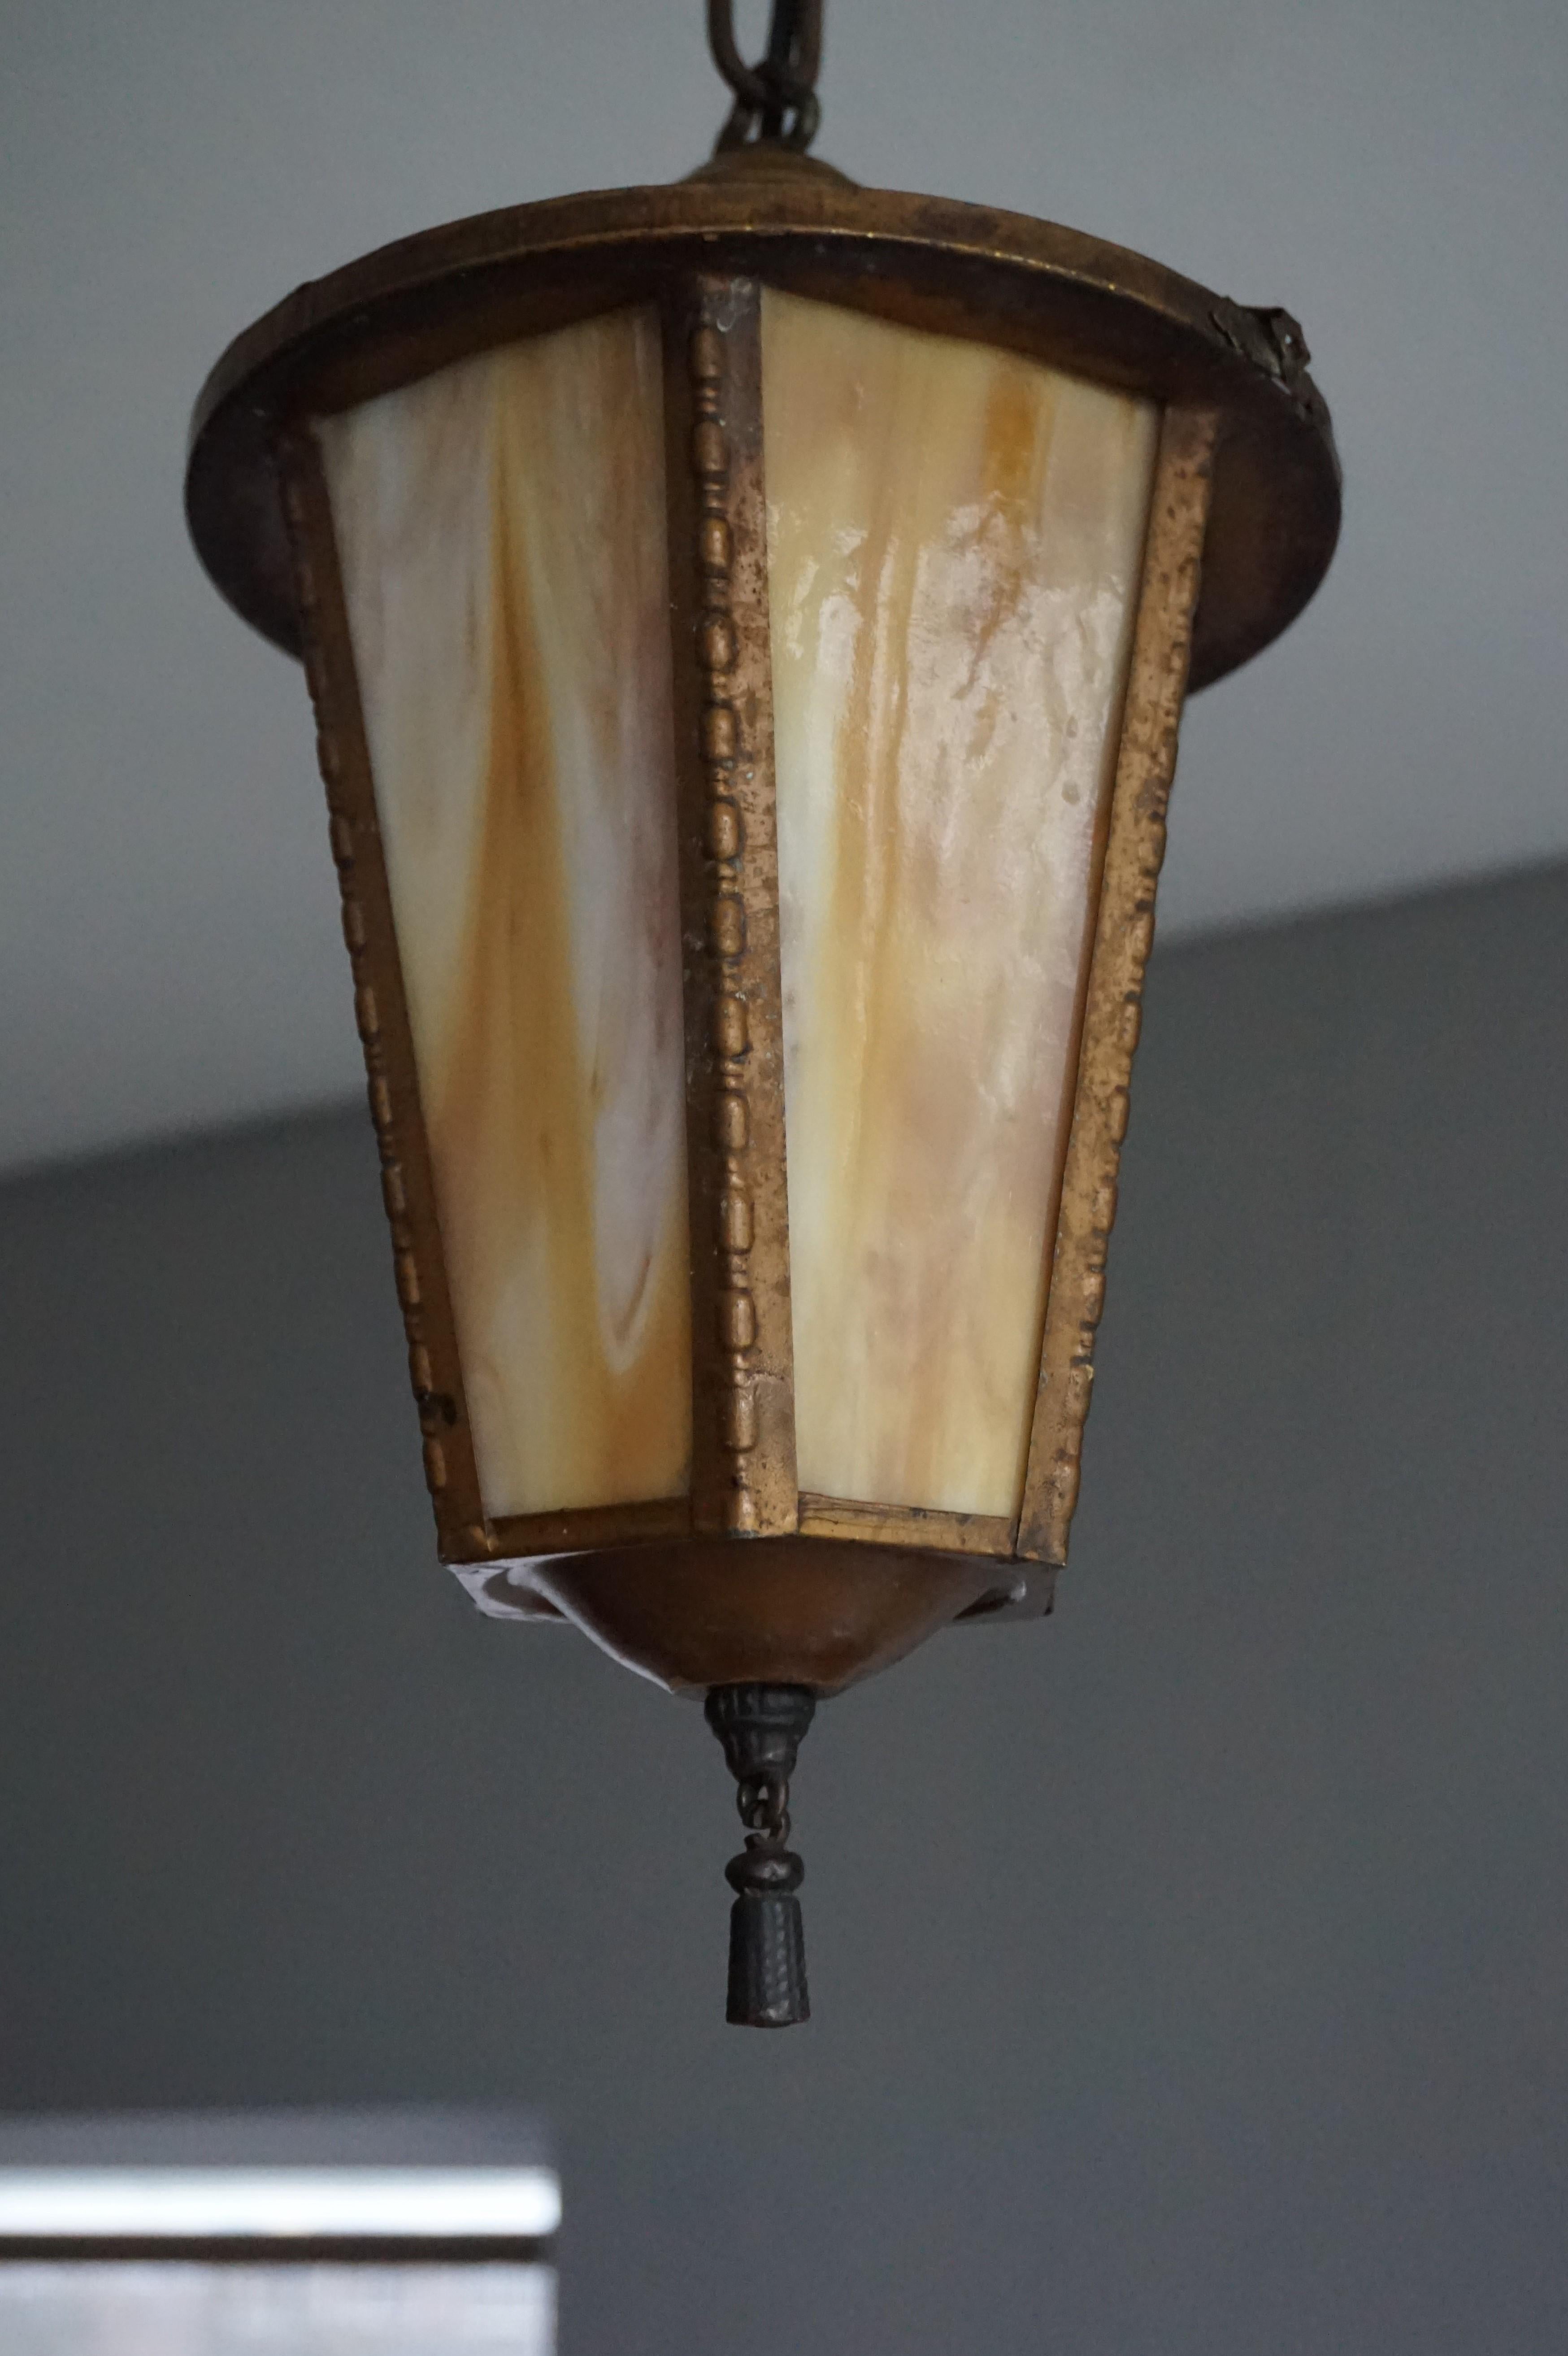 Small church entrance light fixture with a cast iron tassel.

The former owners told us that this rare and all-original light fixture once was on the ceiling at the entrance of a small Gothic Revival church. The hook that connects the pendant and